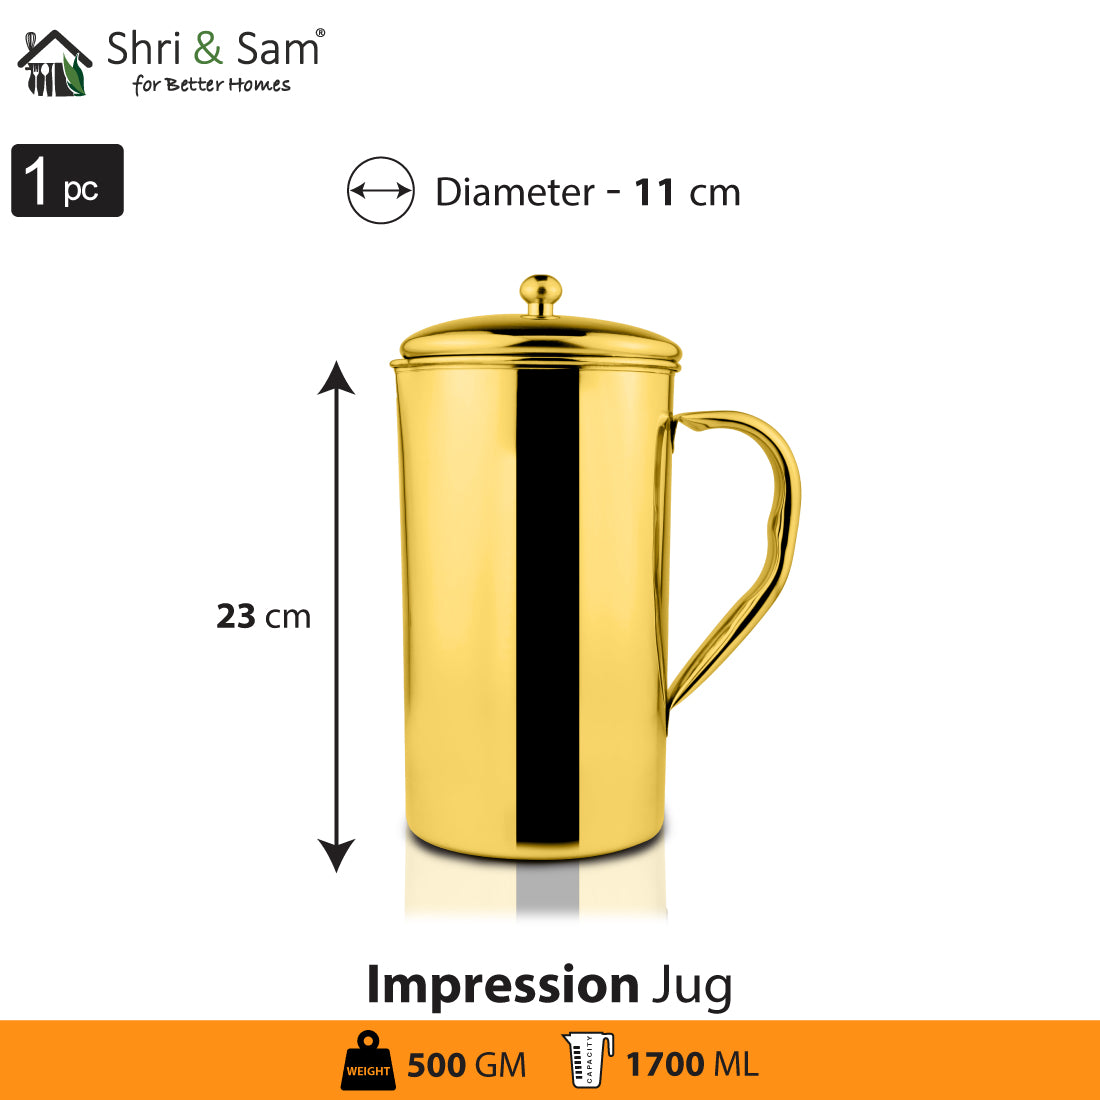 Stainless Steel 1700 ML Jug with Gold PVD Coating Impression